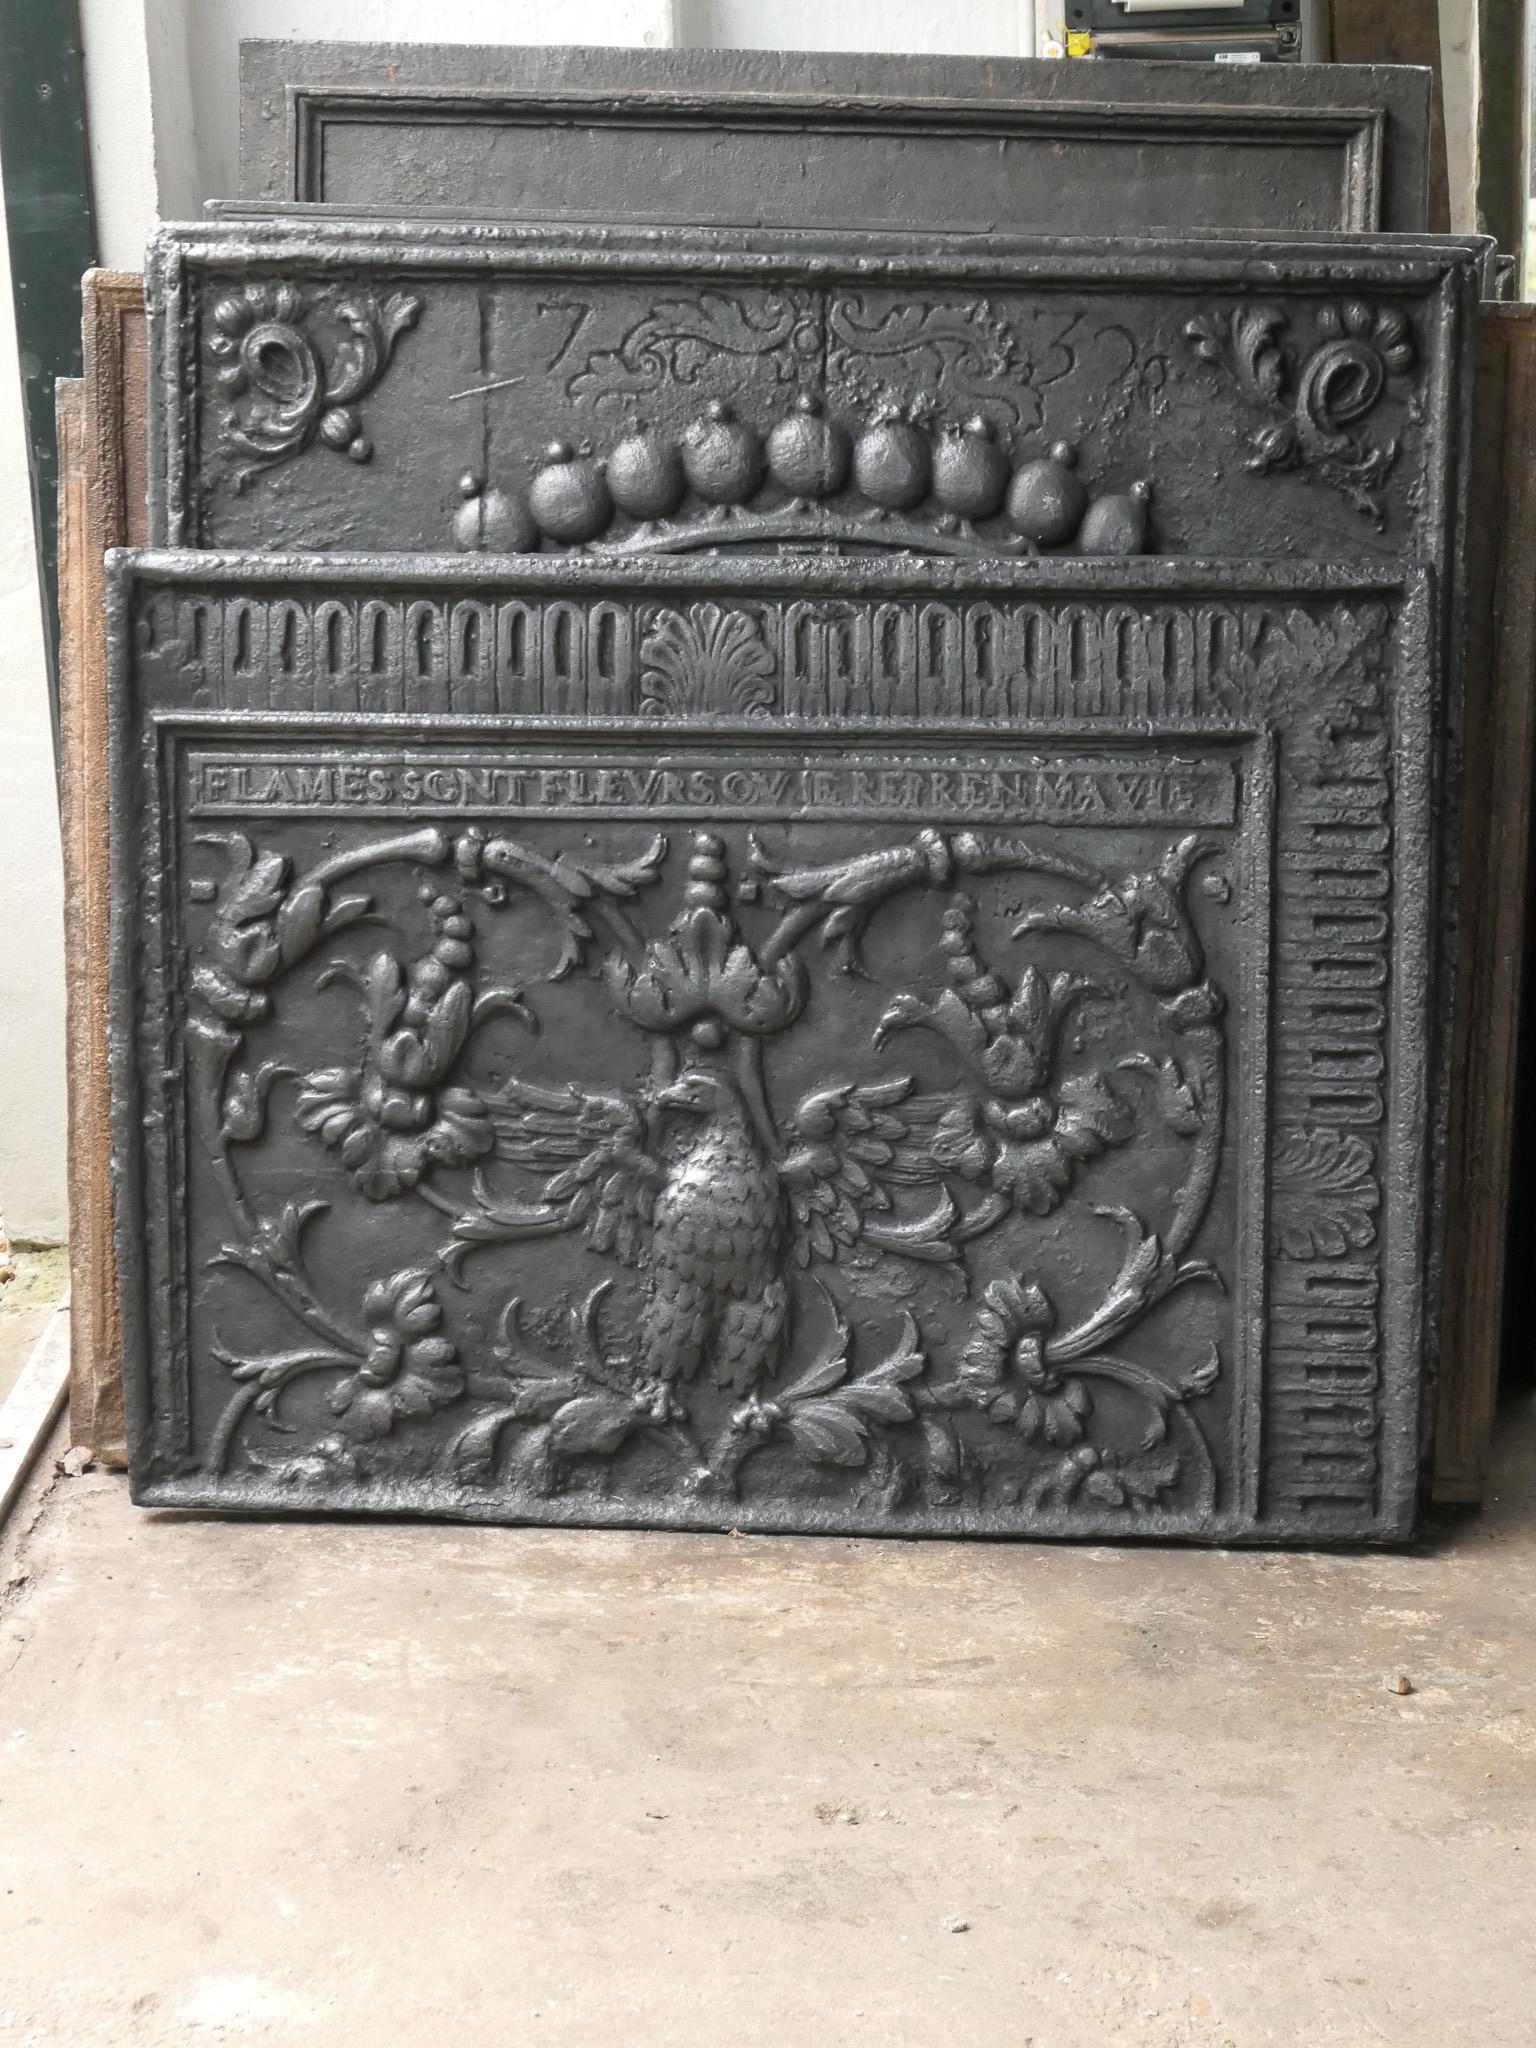 Late 19th-early 20th century French Louis XIV style fireback with a phoenix arising from its ashes. With the text: 